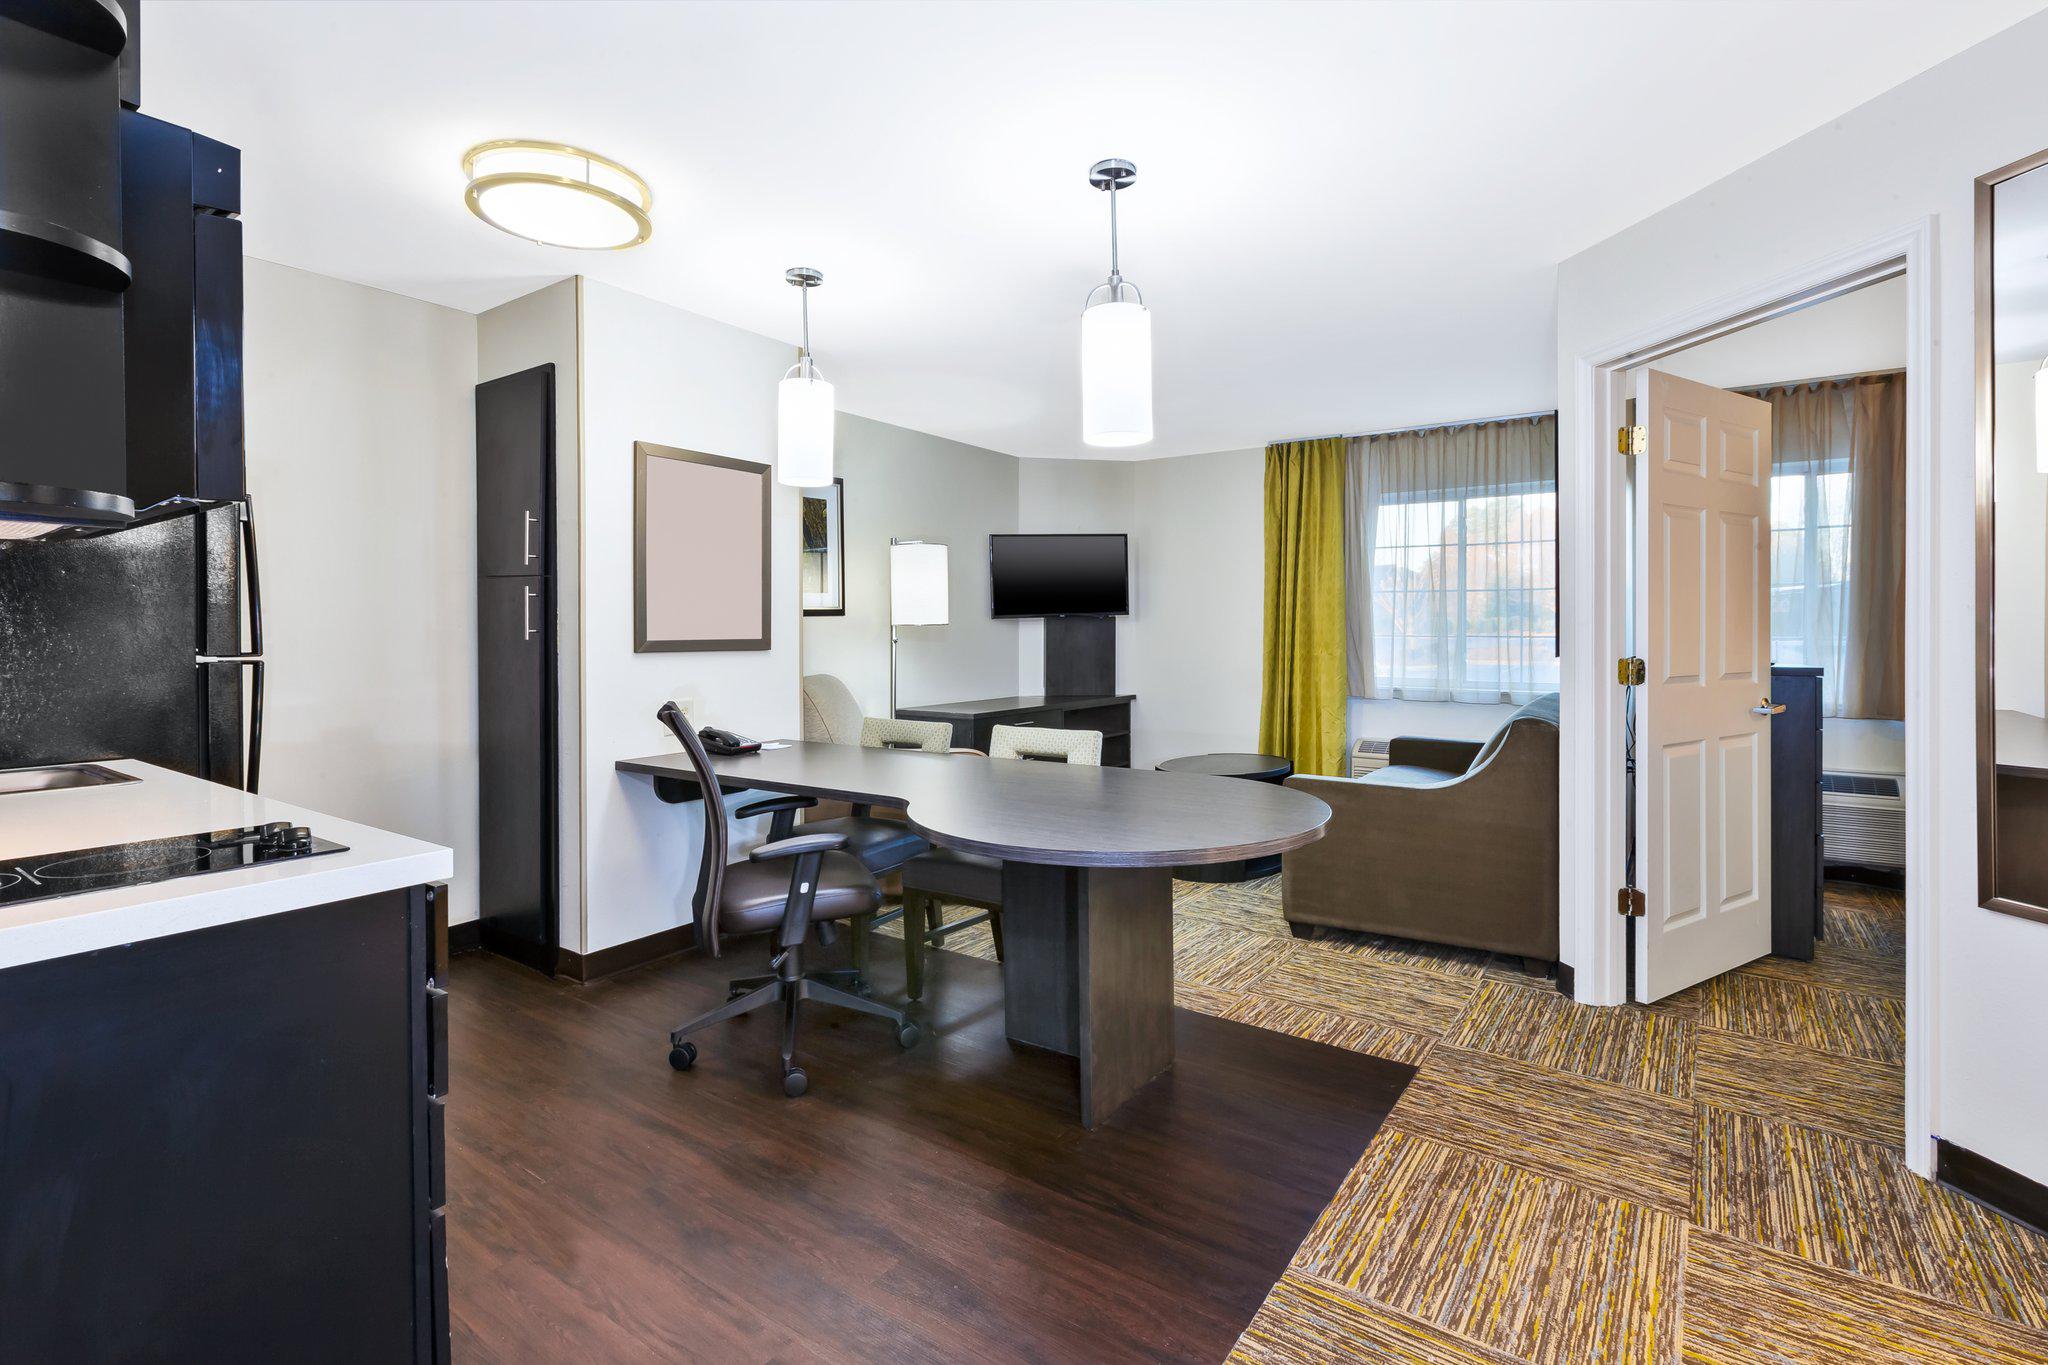 Candlewood Suites Huntersville-Lake Norman Area Photo